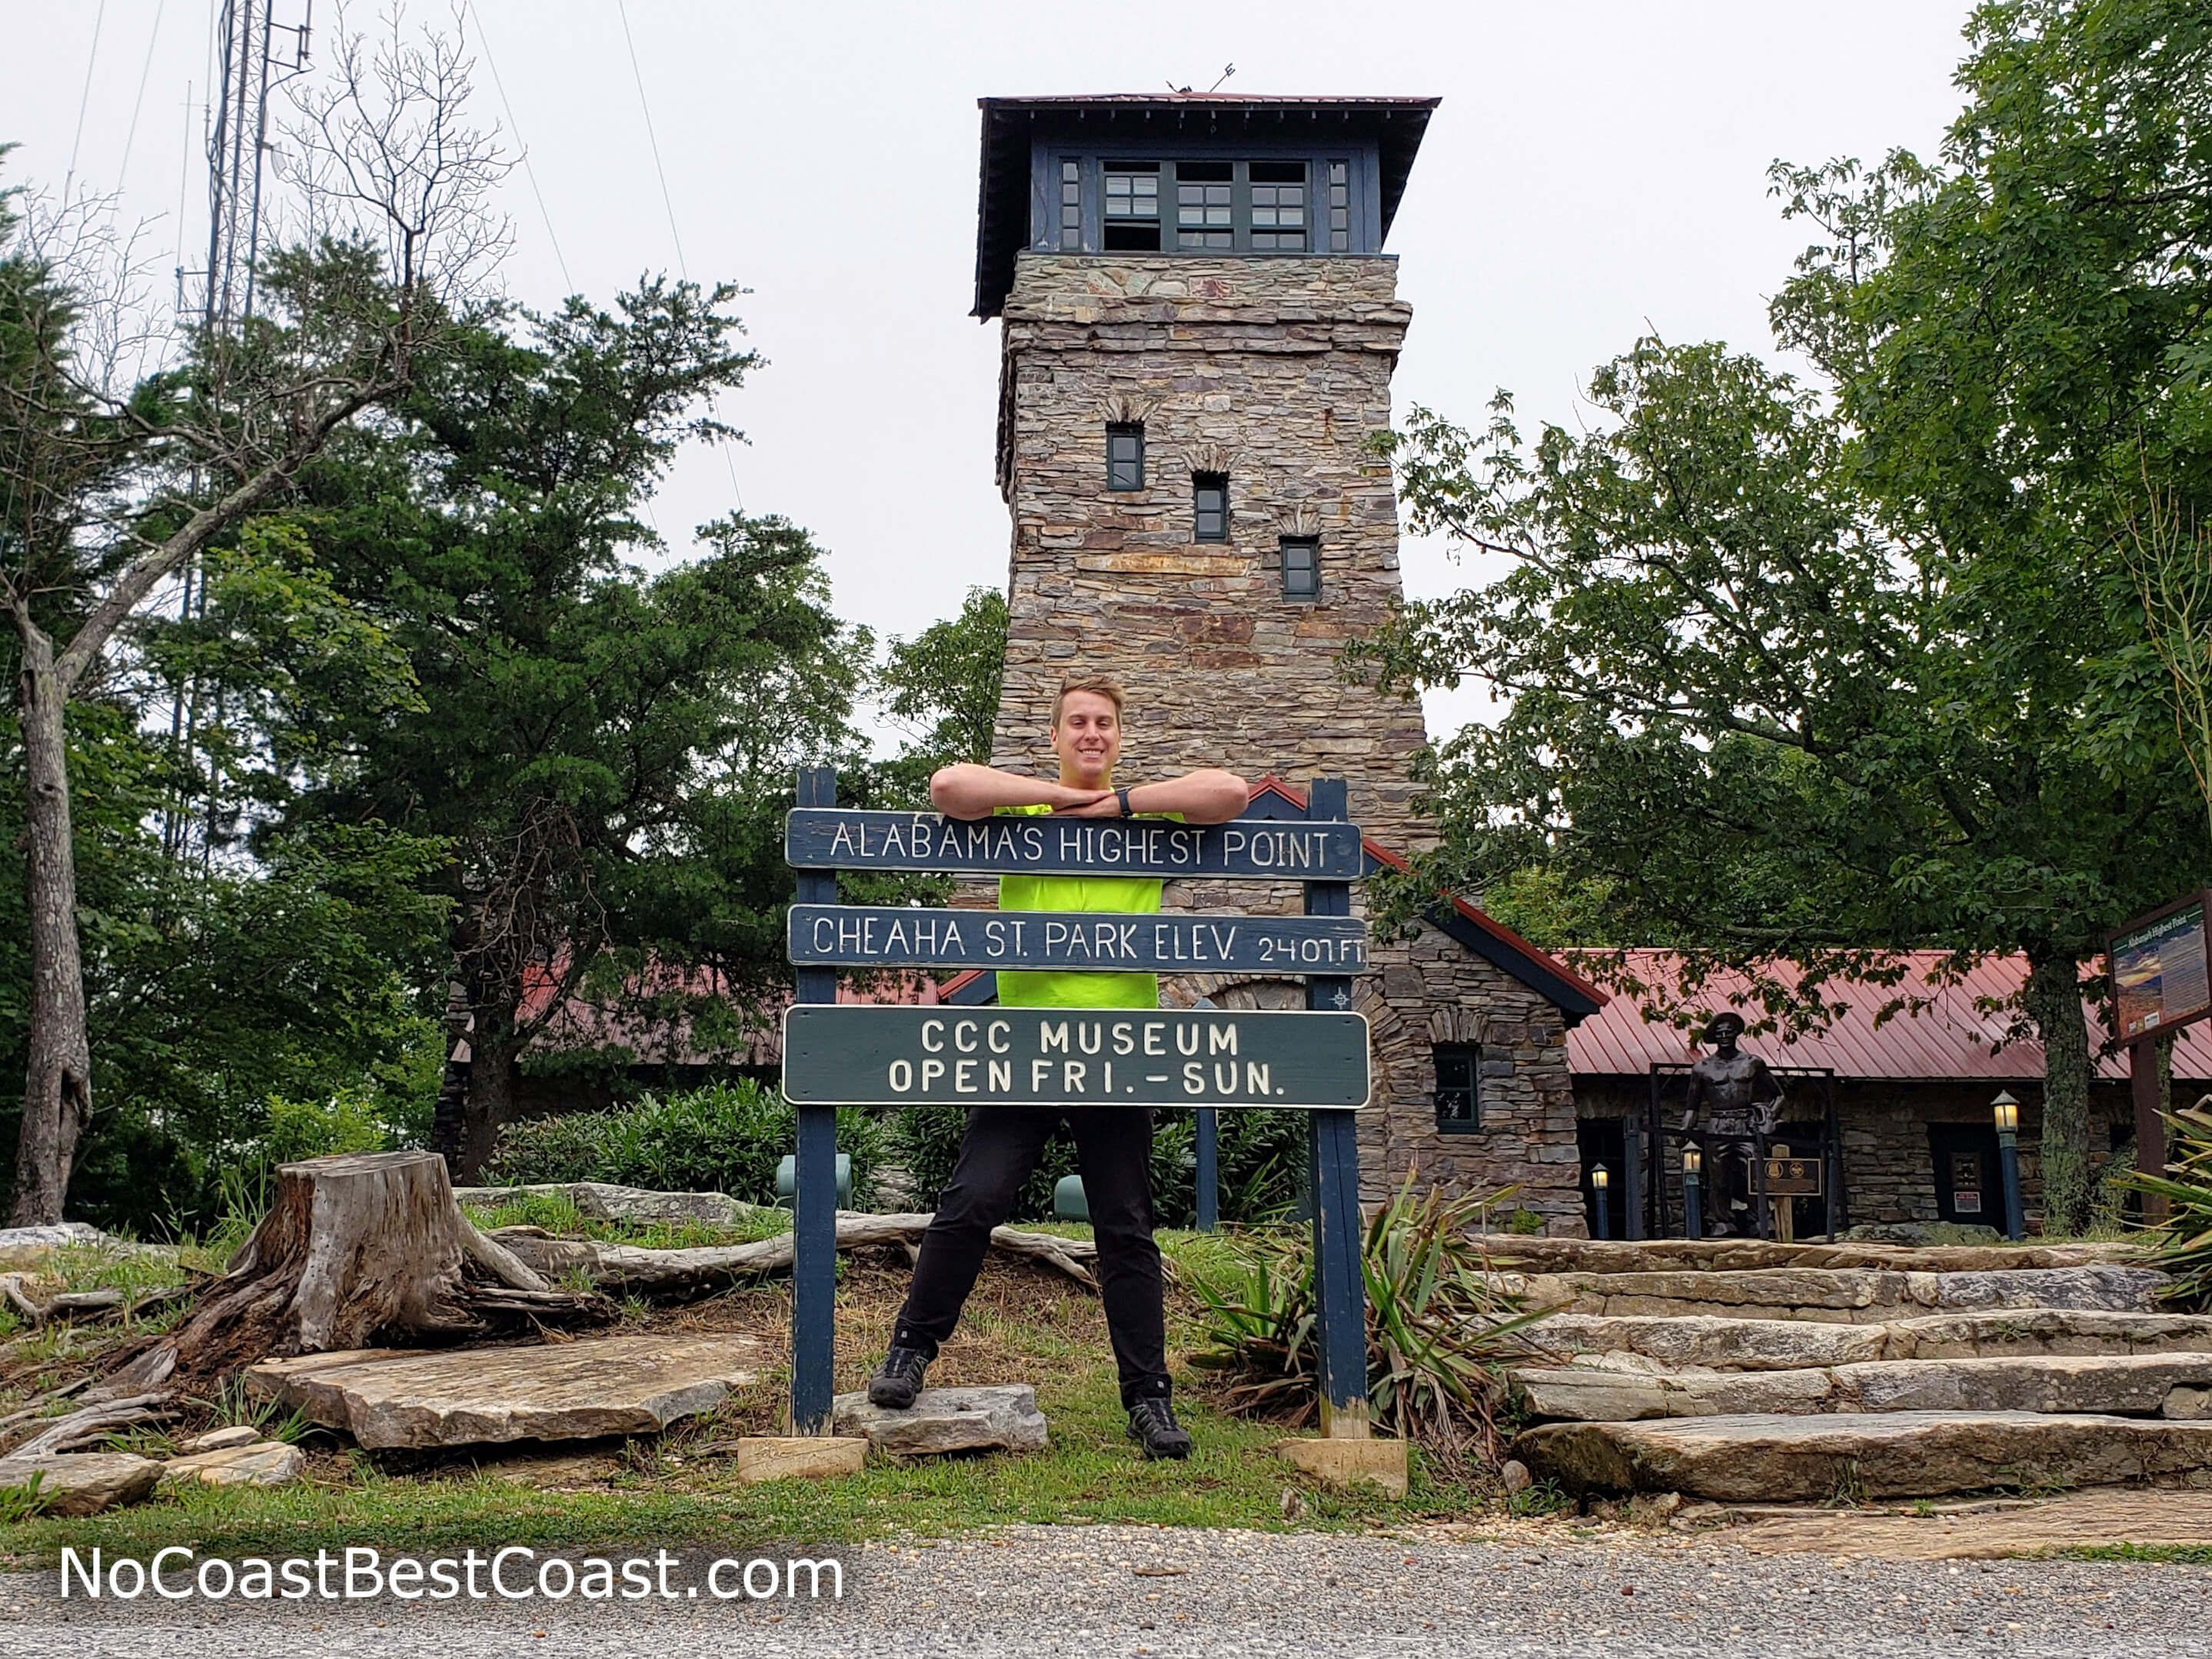 The sign, observation tower, and CCC Museum at the summit of Cheaha Mountain